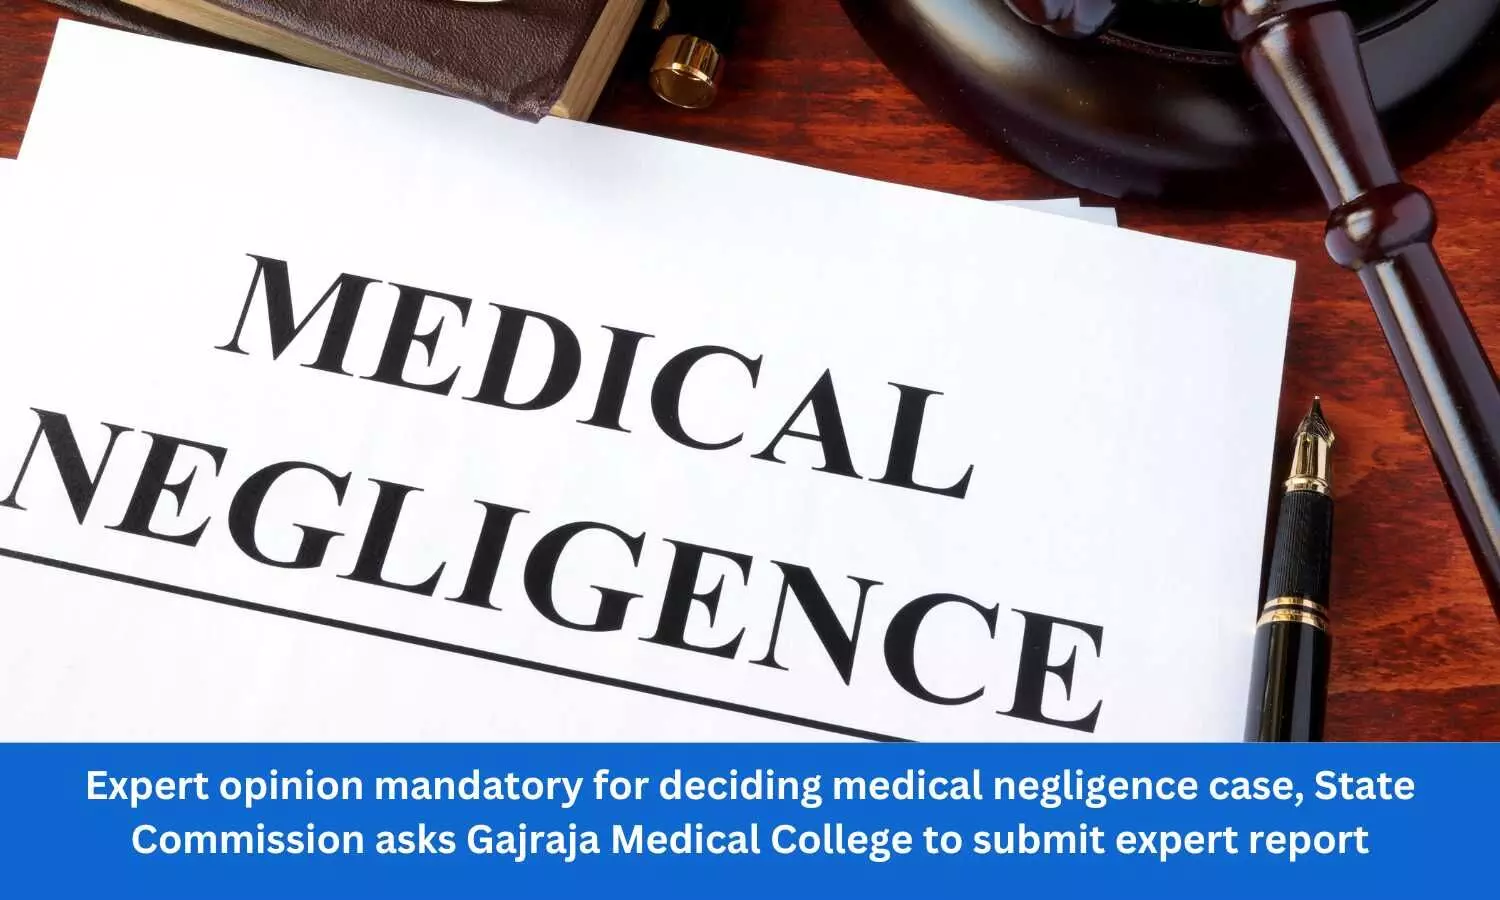 Expert opinion mandatory for deciding medical negligence case, State Commission asks Gajraja Medical College to submit expert report